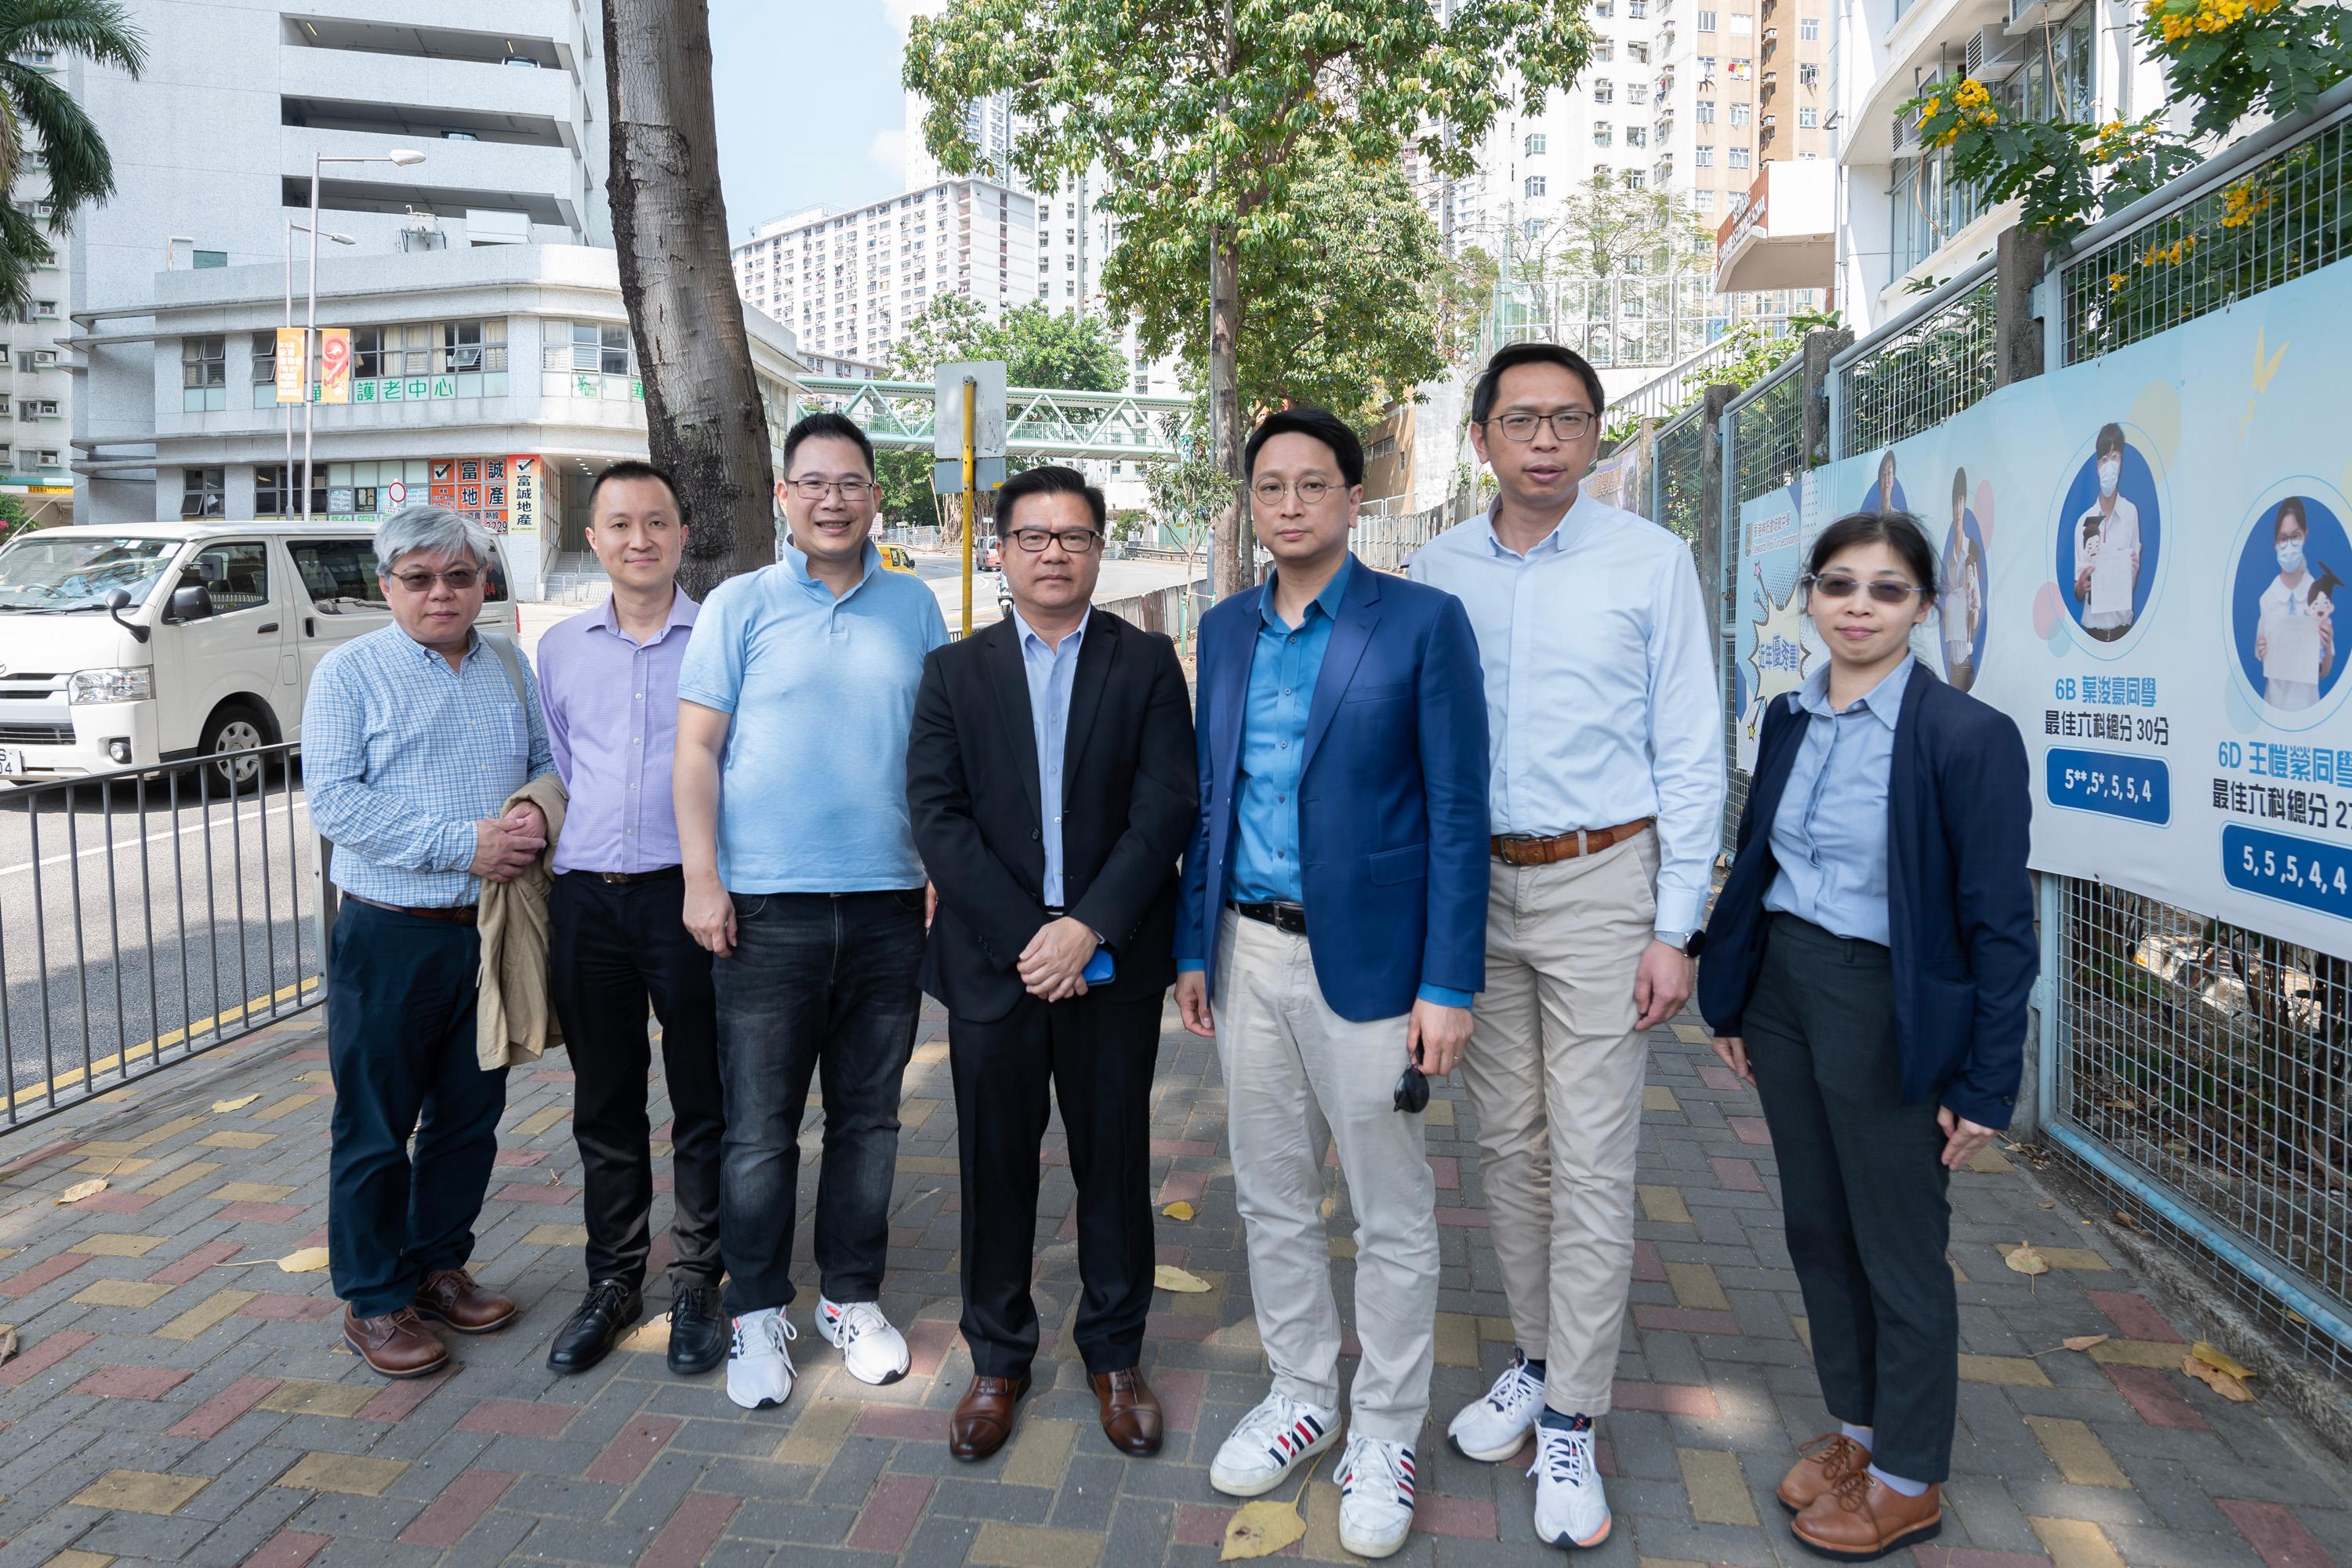 Legislative Council Members conducted a site visit to Tsz Wan Shan area today (March 25) to follow up on issues raised by a deputation relating to a request for provision of Tsz Wan Shan station on the East Kowloon "Crossing-the-Hill" Line. Photo shows Mr Tang Ka-piu (Convenor) (third right), Mr Luk Chung-hung (second right), Mr Yang Wing-kit (third left) and representatives of the Government on Hammer Hill Road.